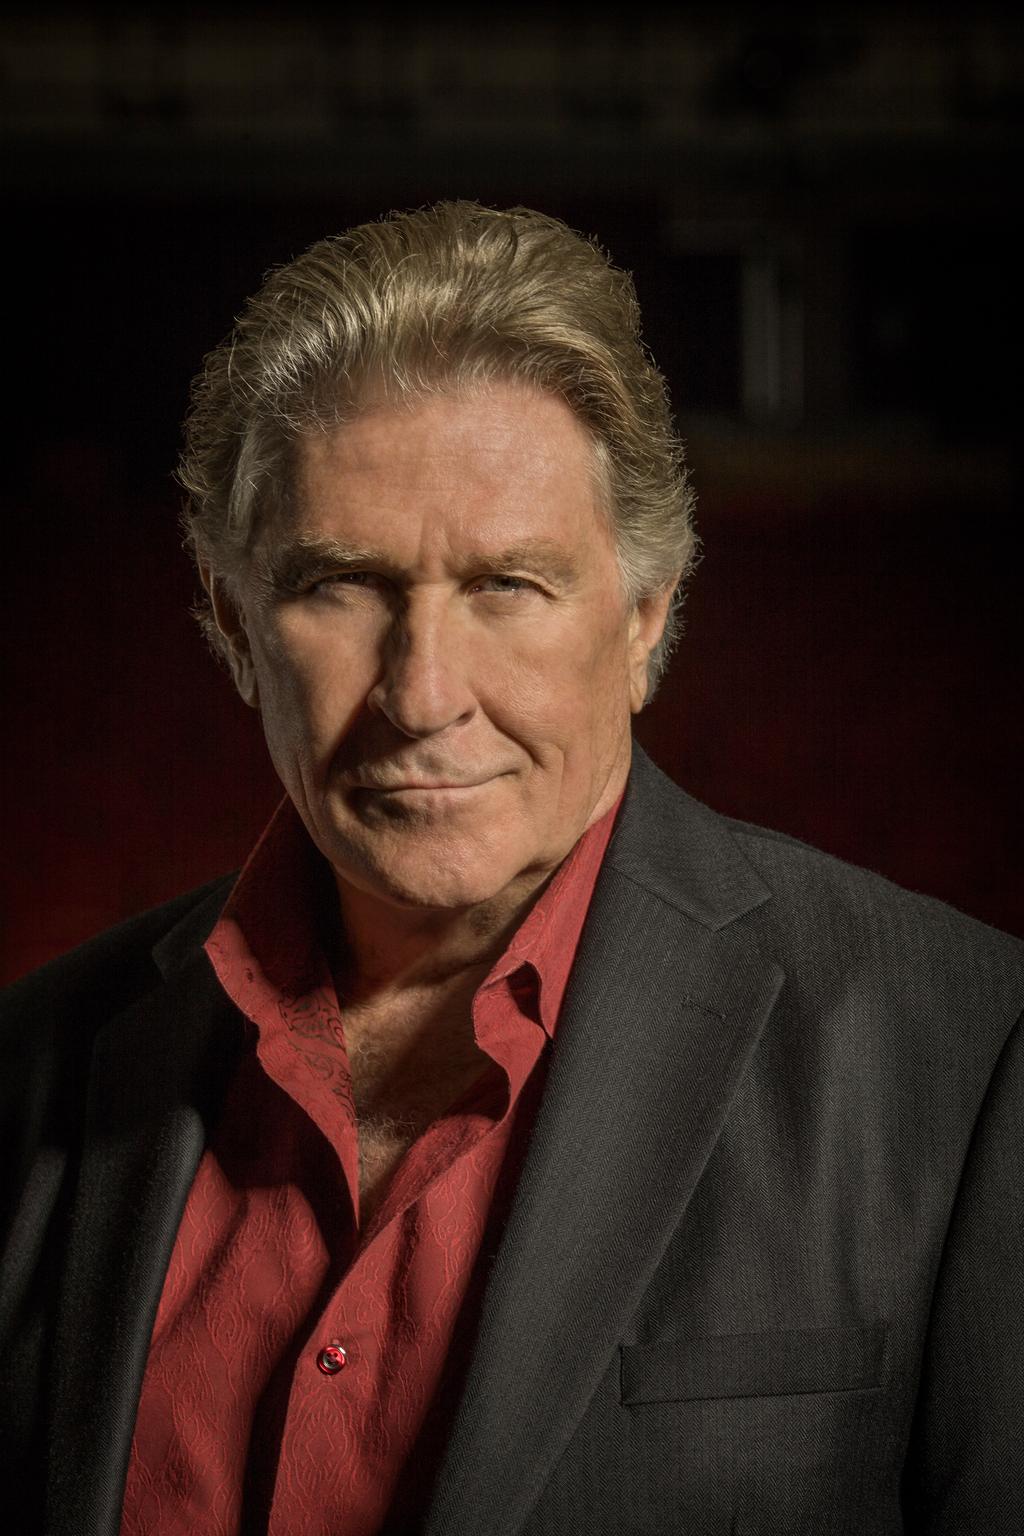 SHERRILL MILNES is universally acclaimed as the foremost operatic baritone of his generation.